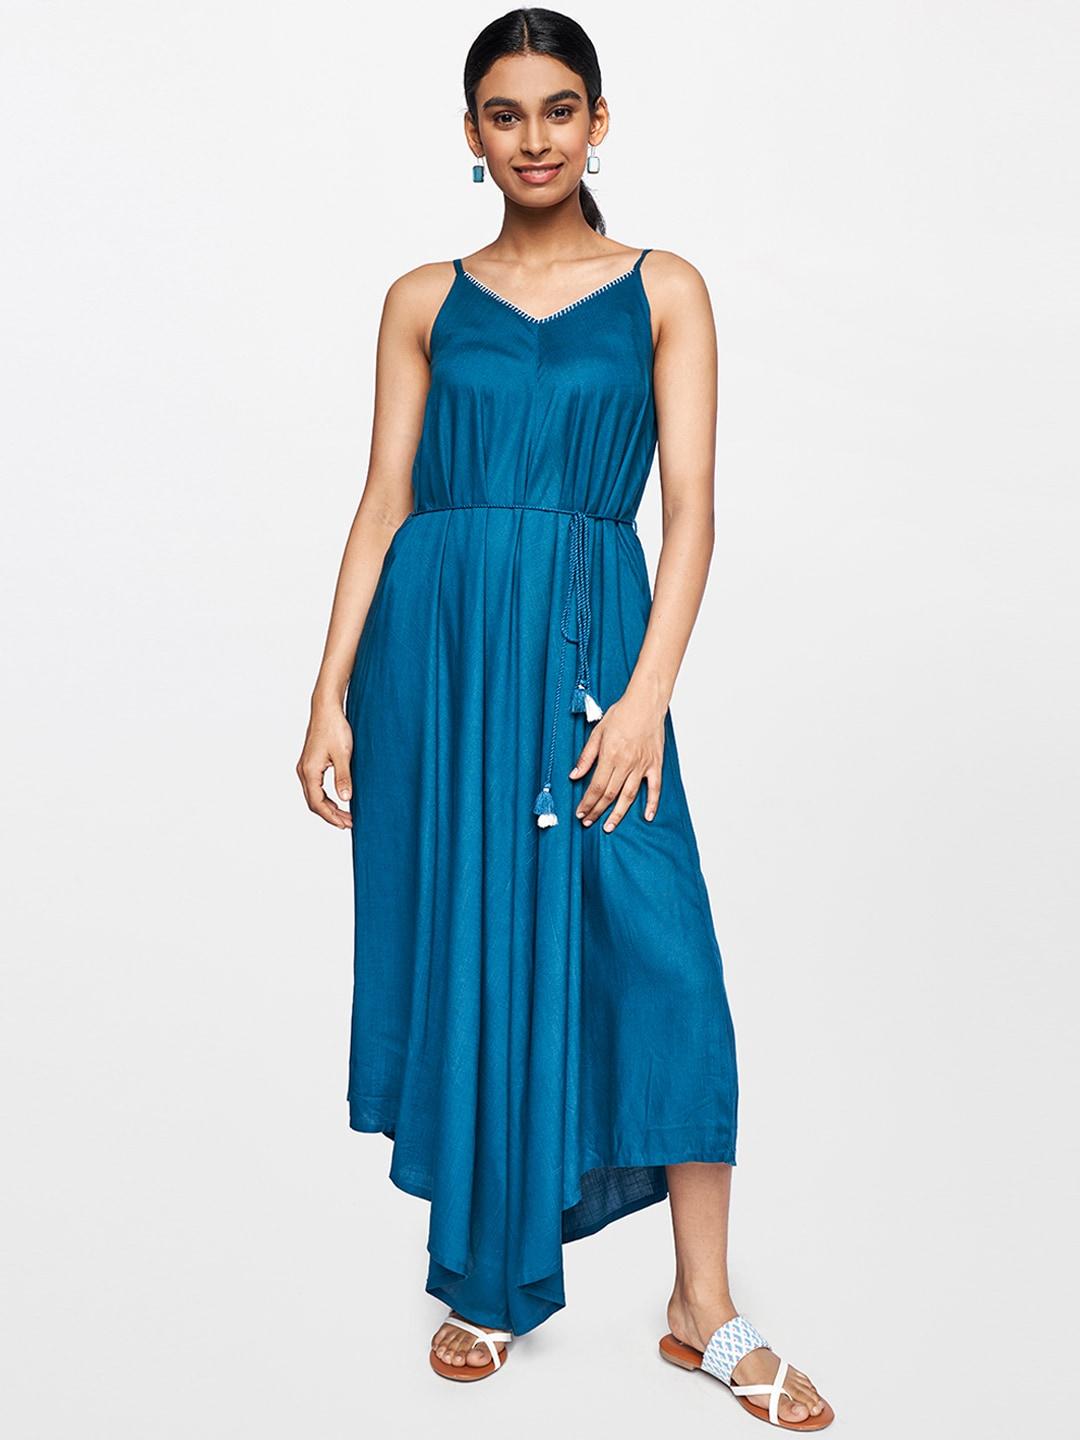 global-desi-women-teal-blue-solid-sleeveless-culotte-jumpsuit-with-waist-tie-ups